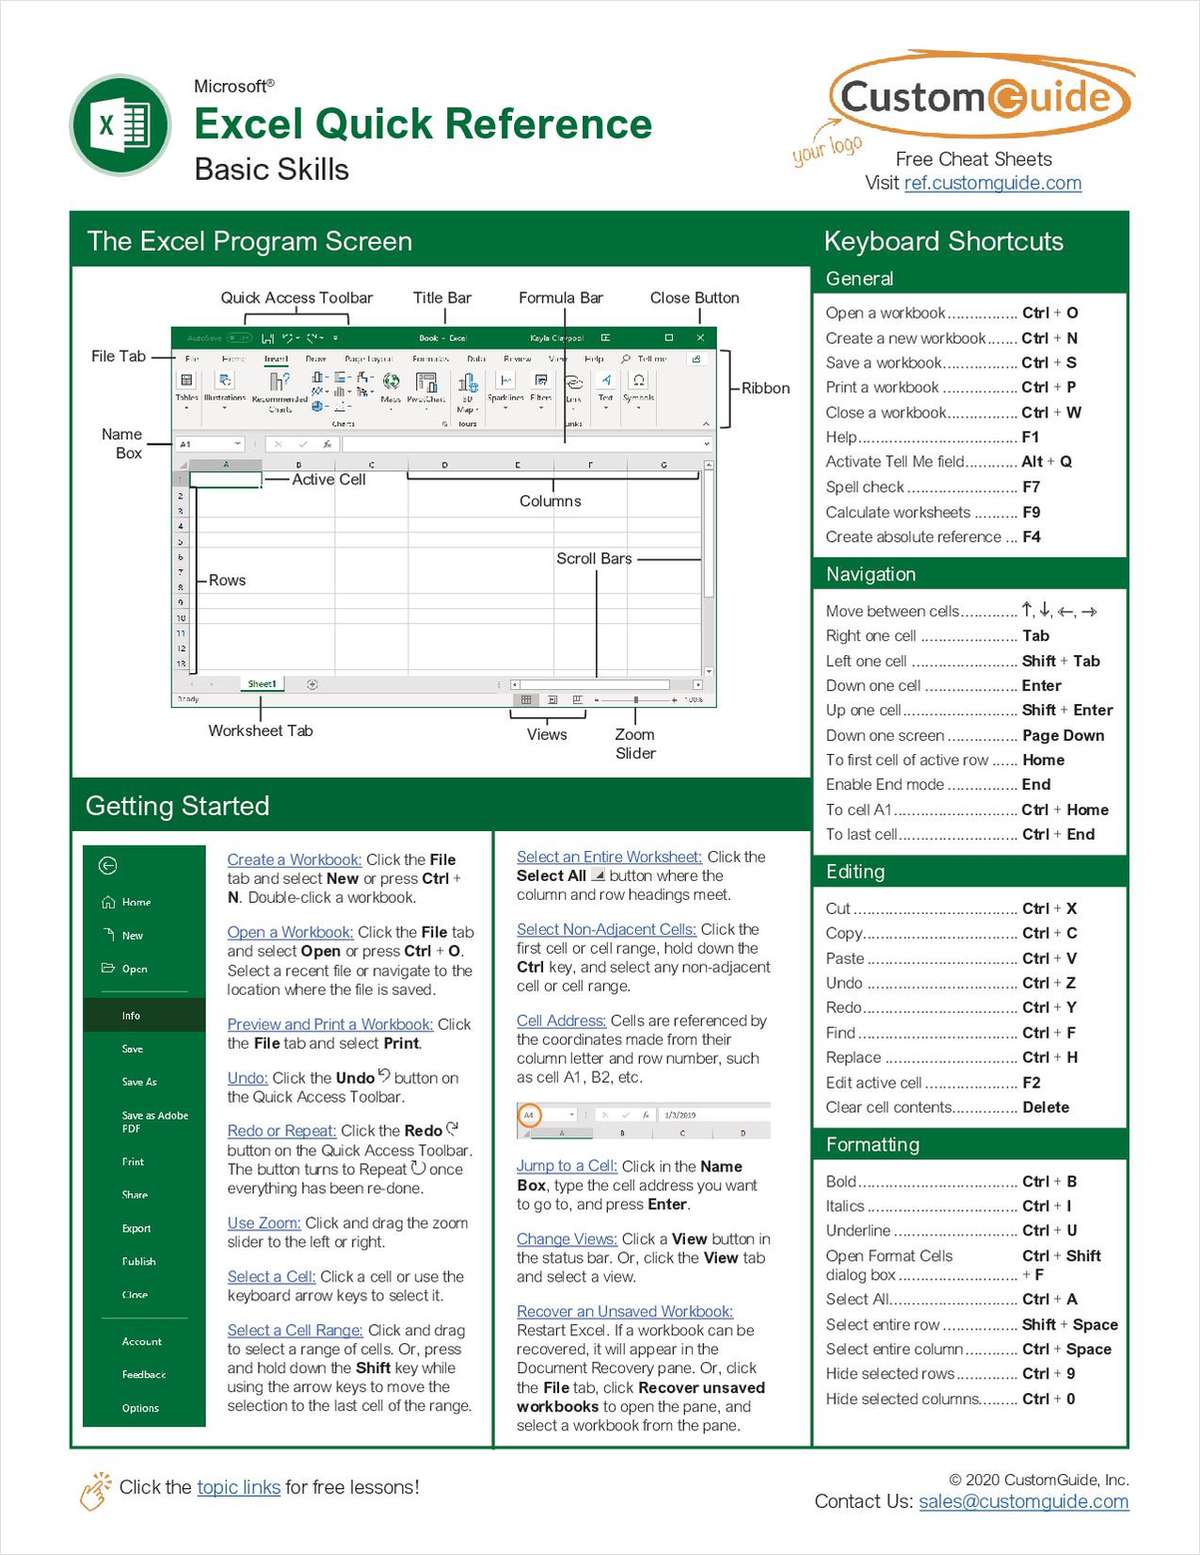 microsoft-excel-quick-reference-guide-free-kit